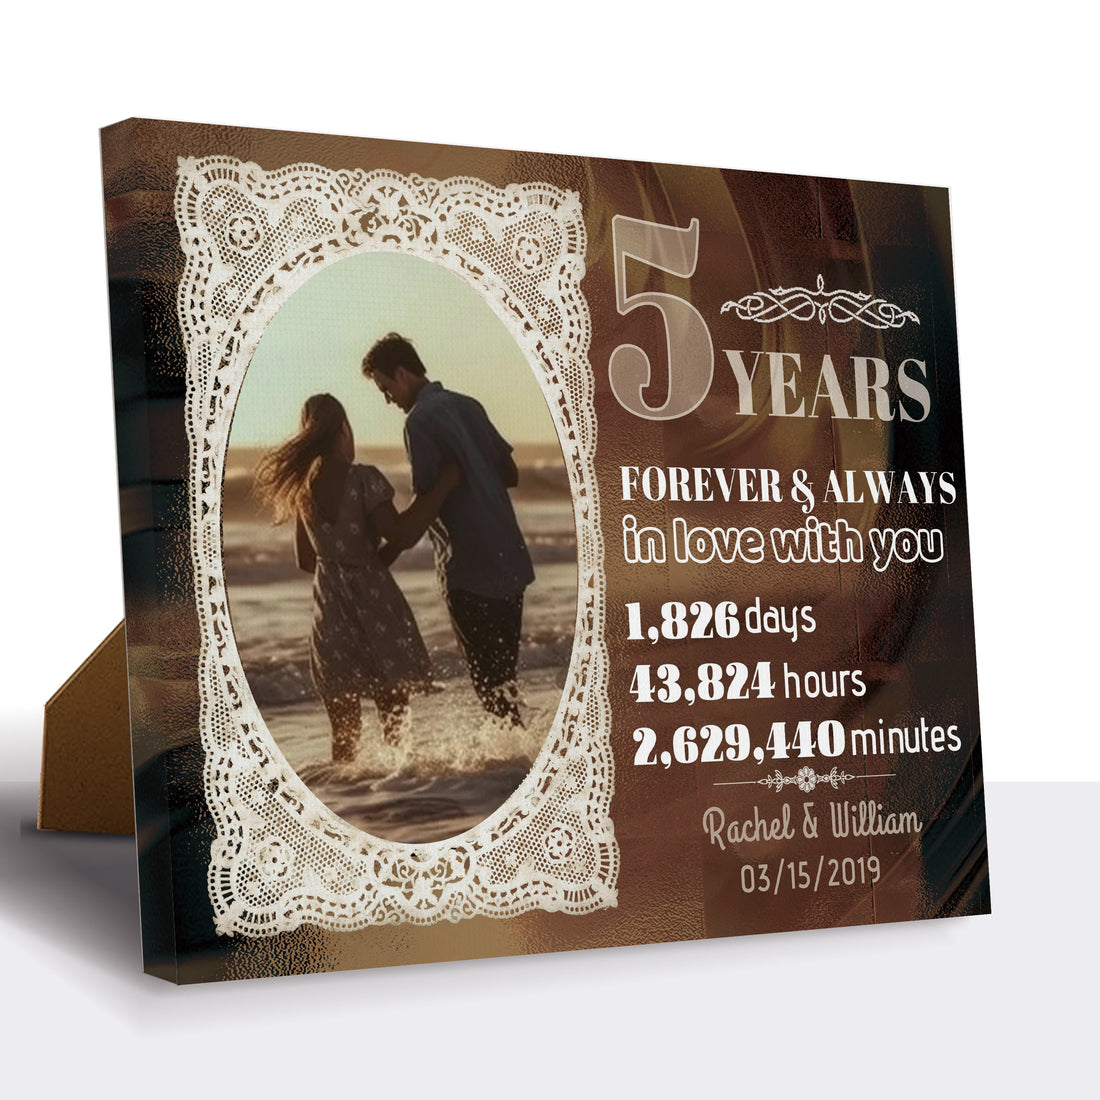 Forever and Always - 5 Year Anniversary Custom Canvas Print